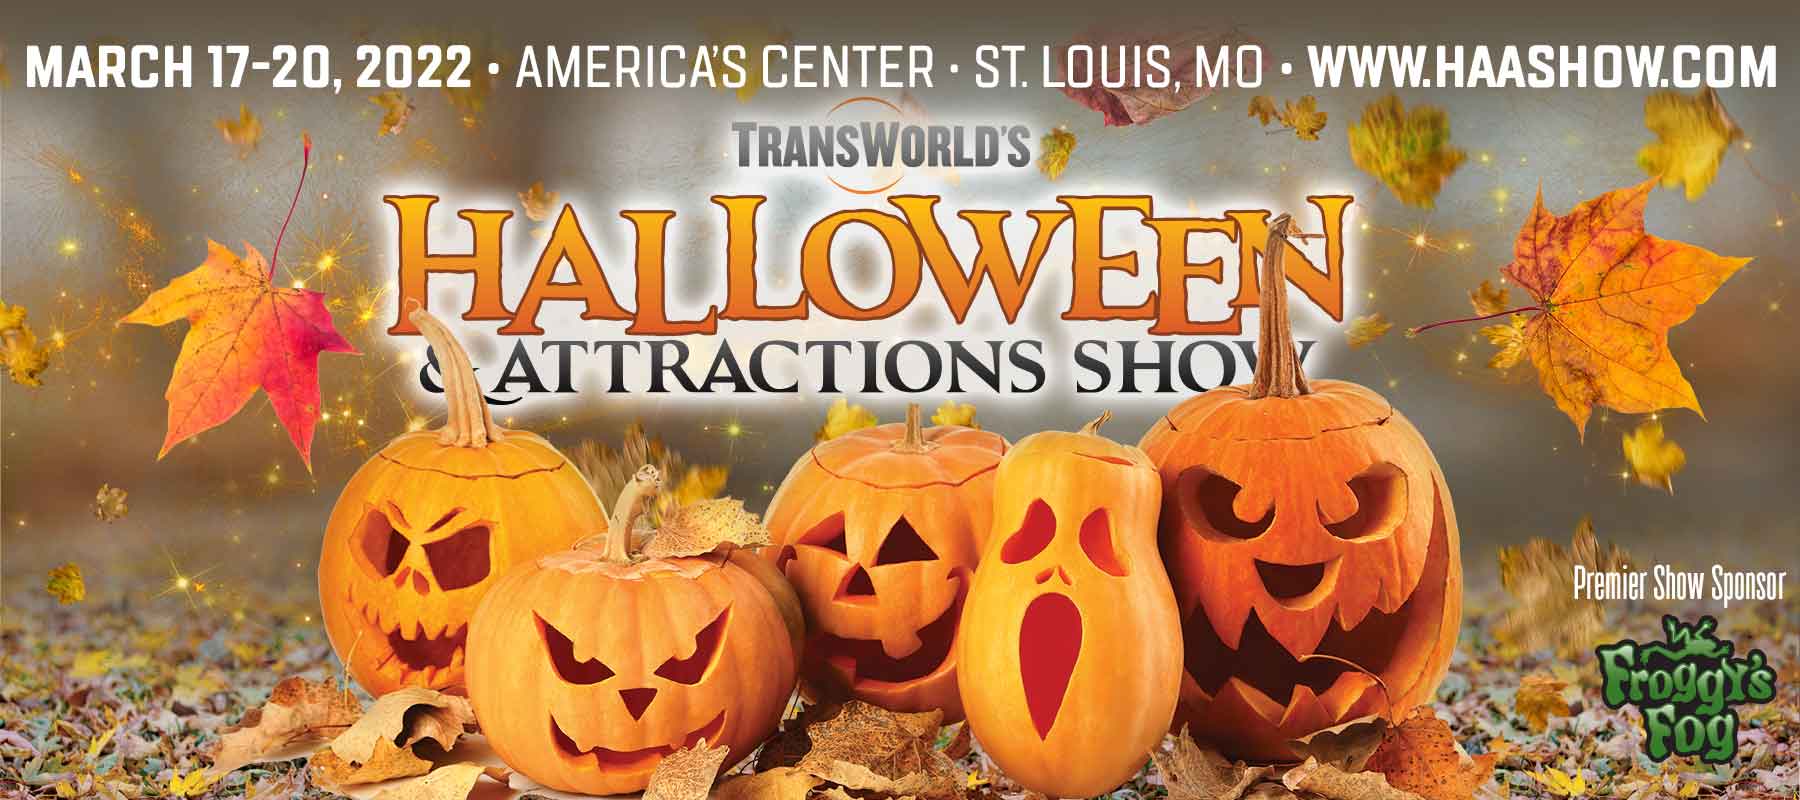 TransWorld's Halloween & Attractions Show and Christmas Show